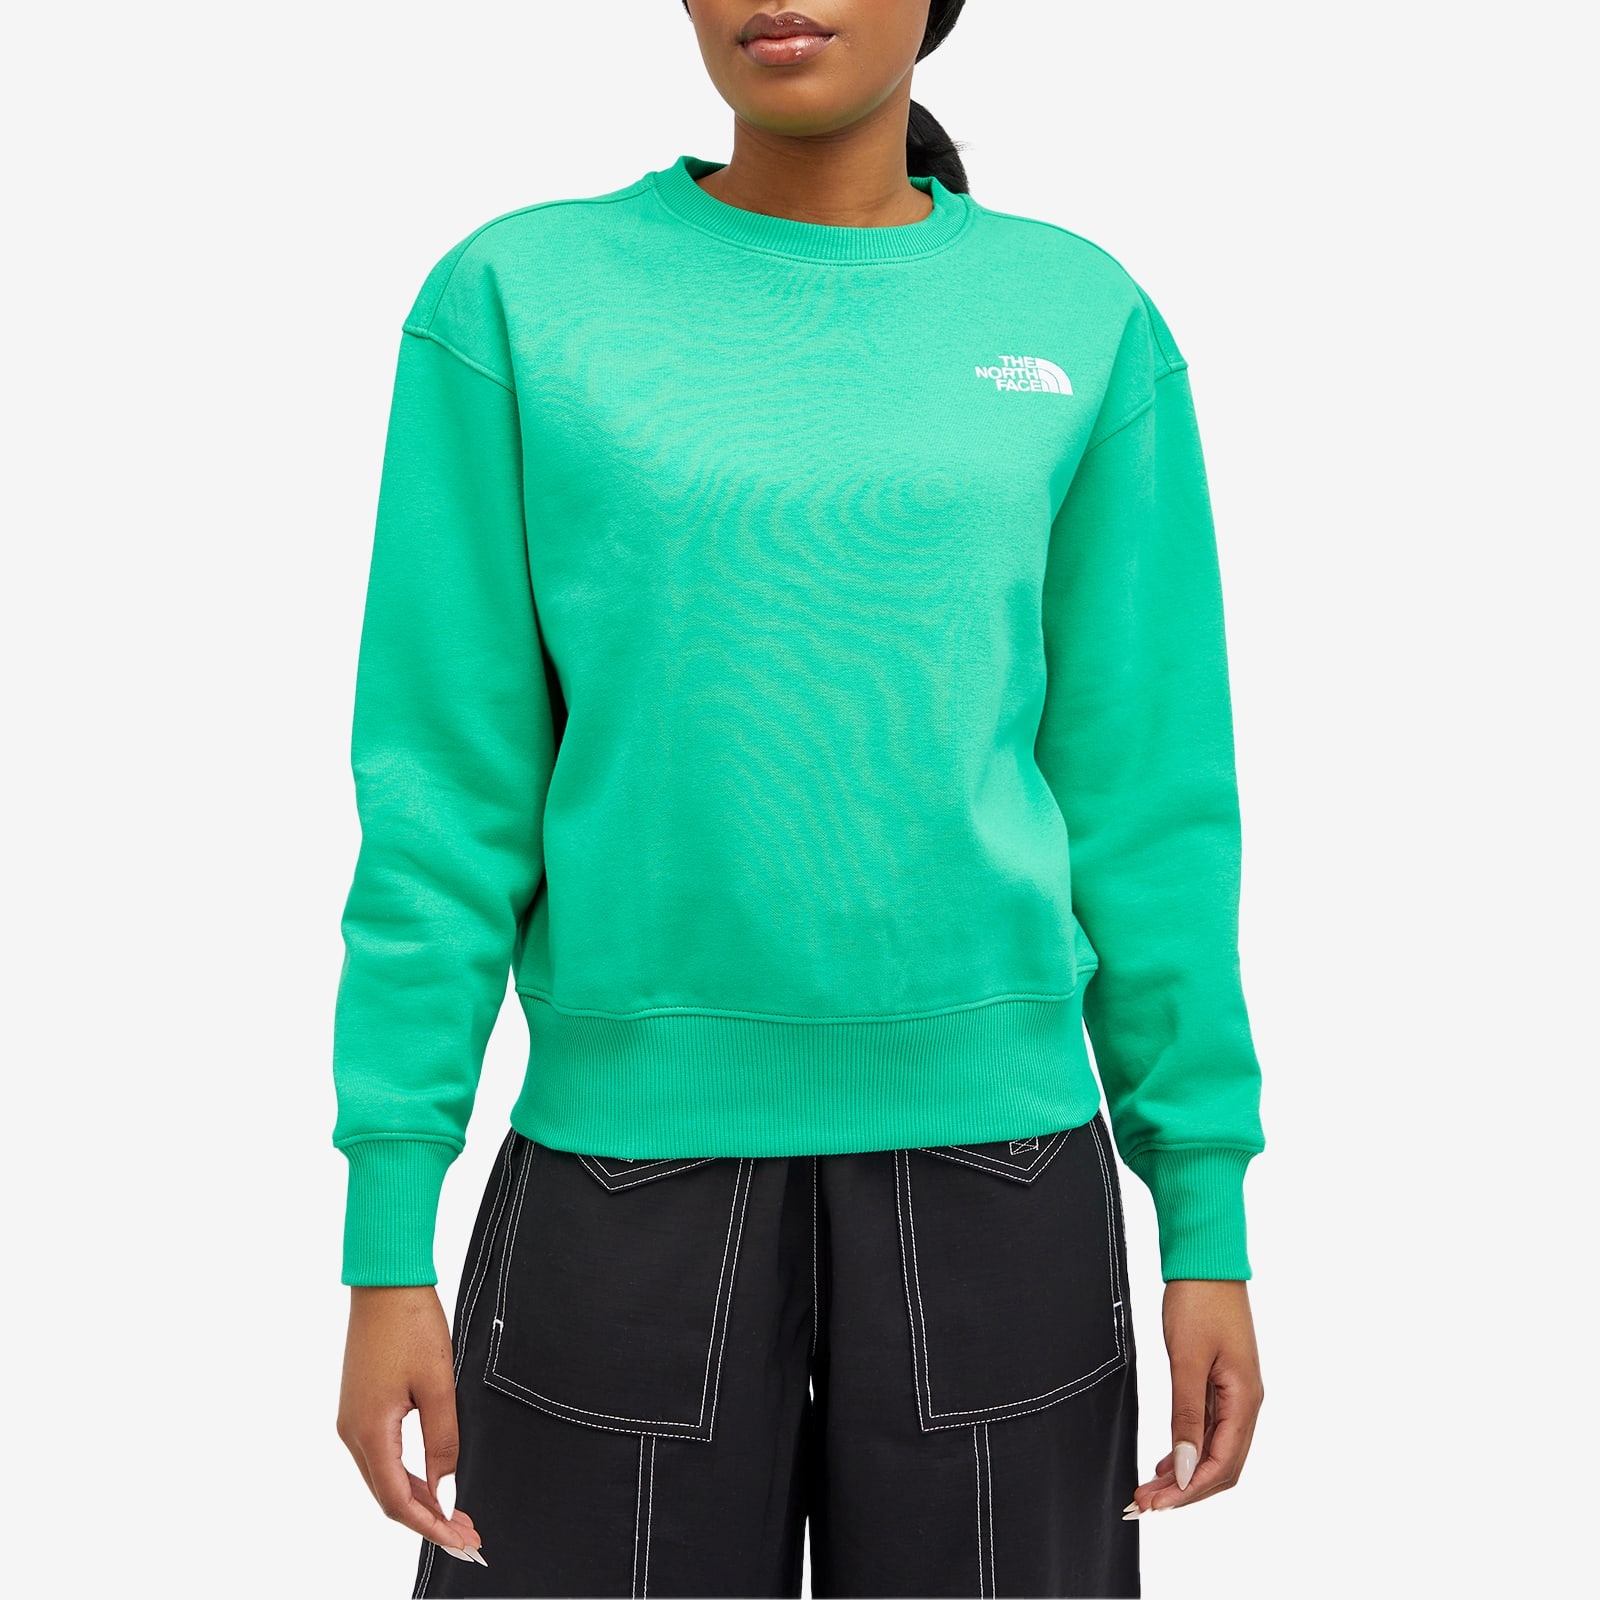 The North Face Essential Crew Sweat - 2